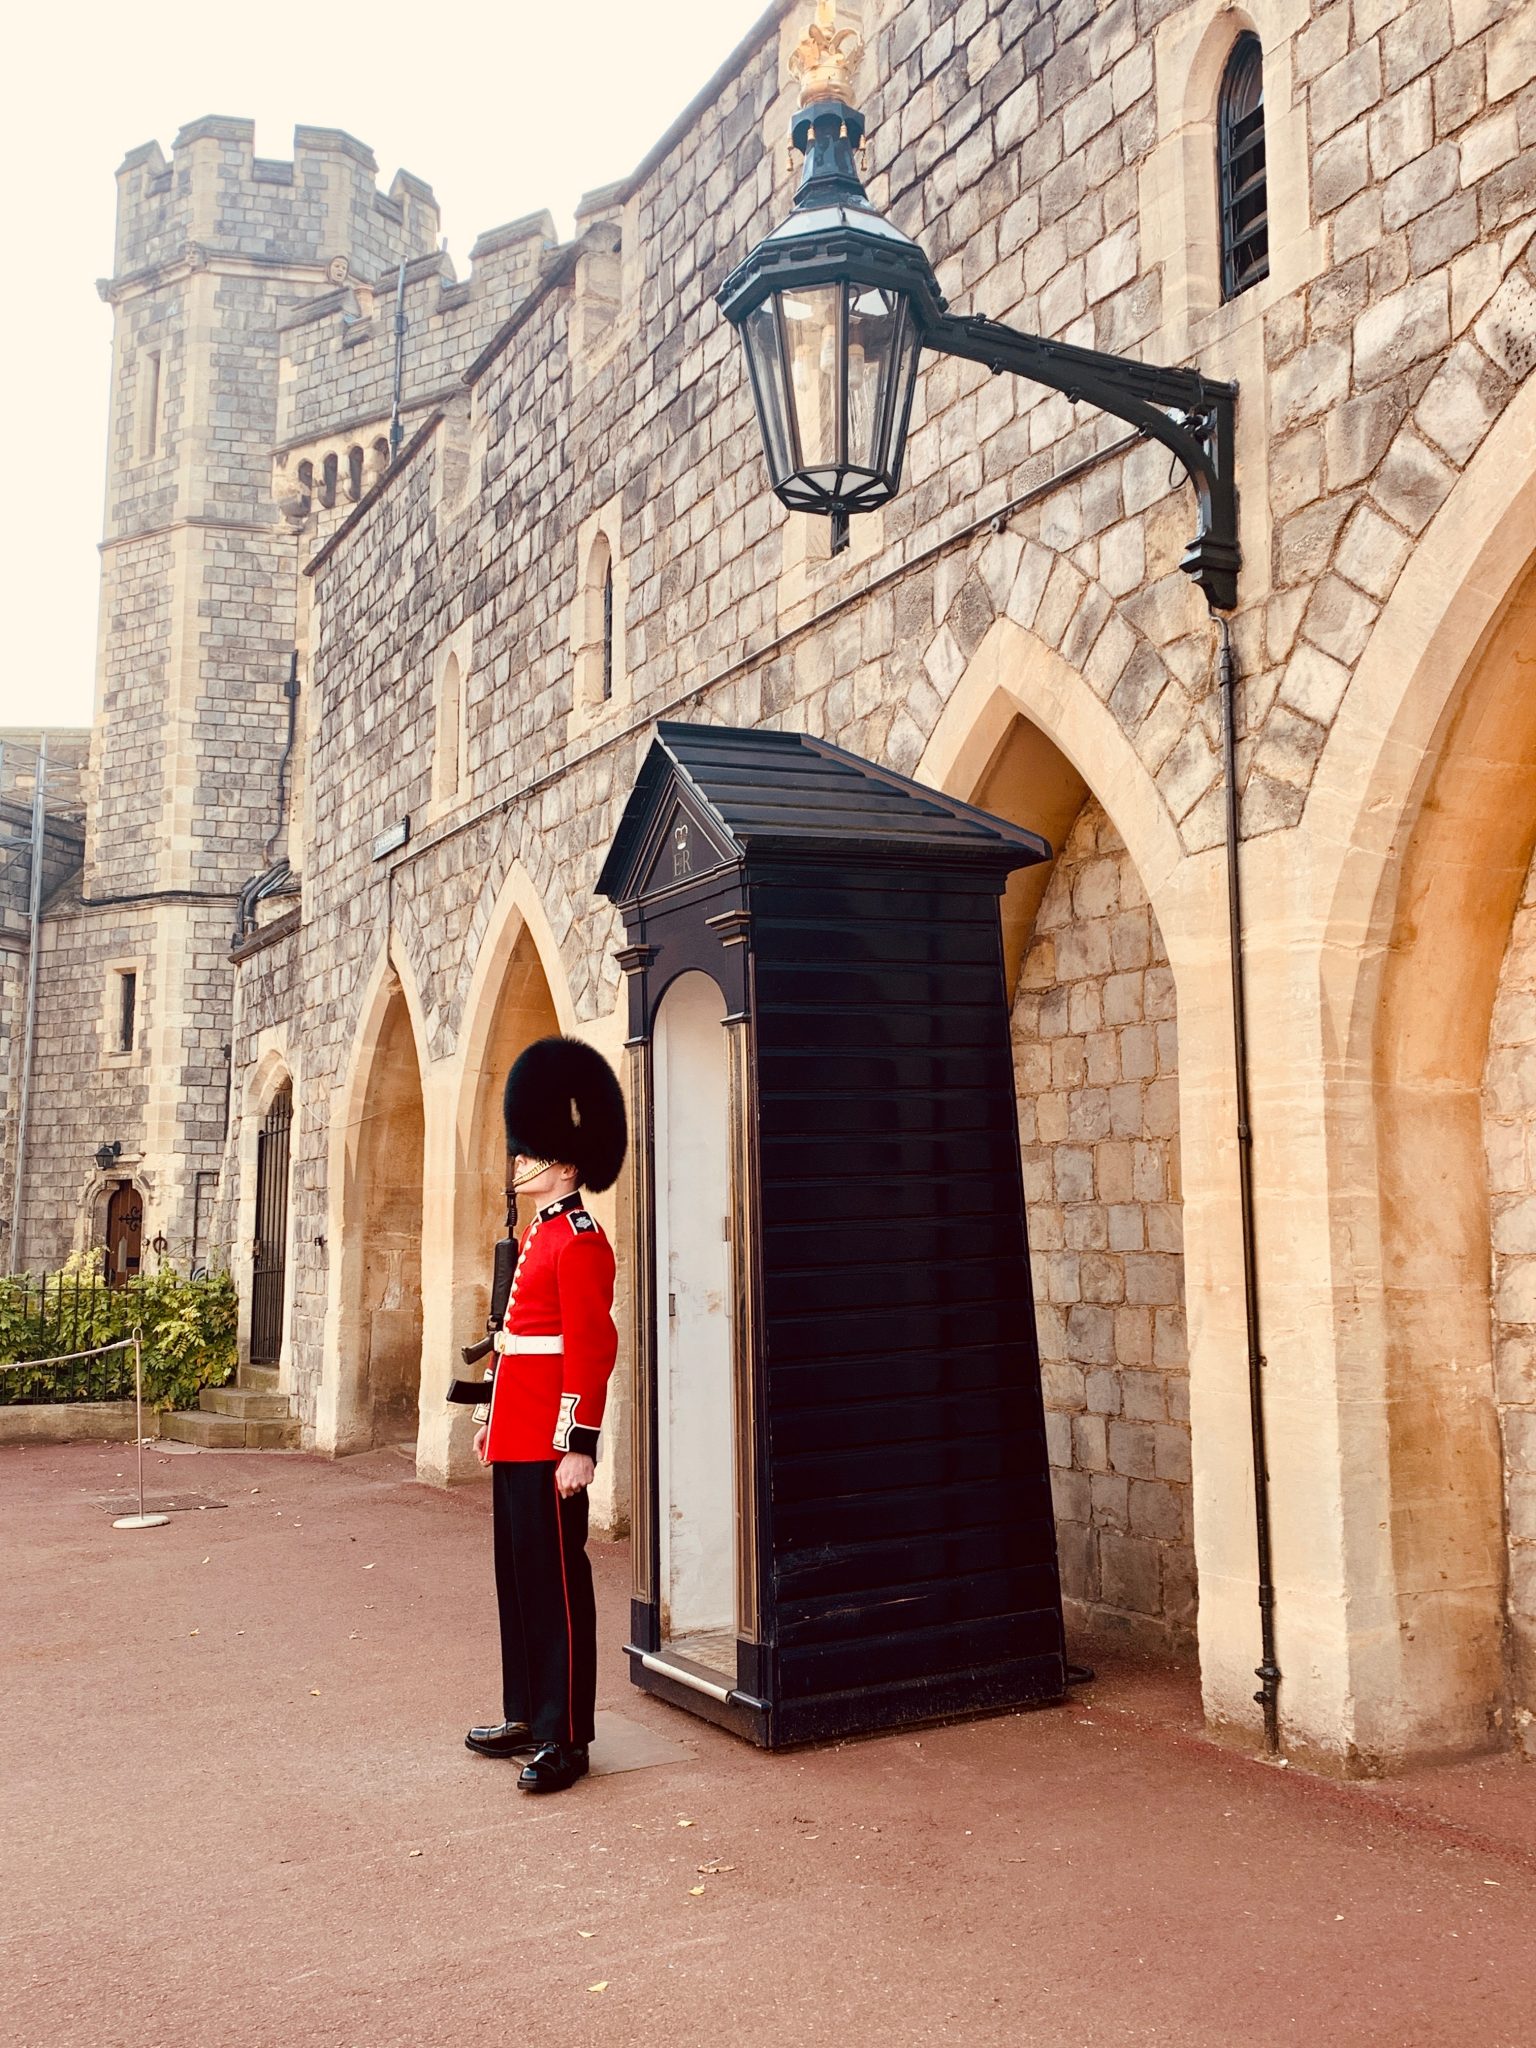 changing the guard